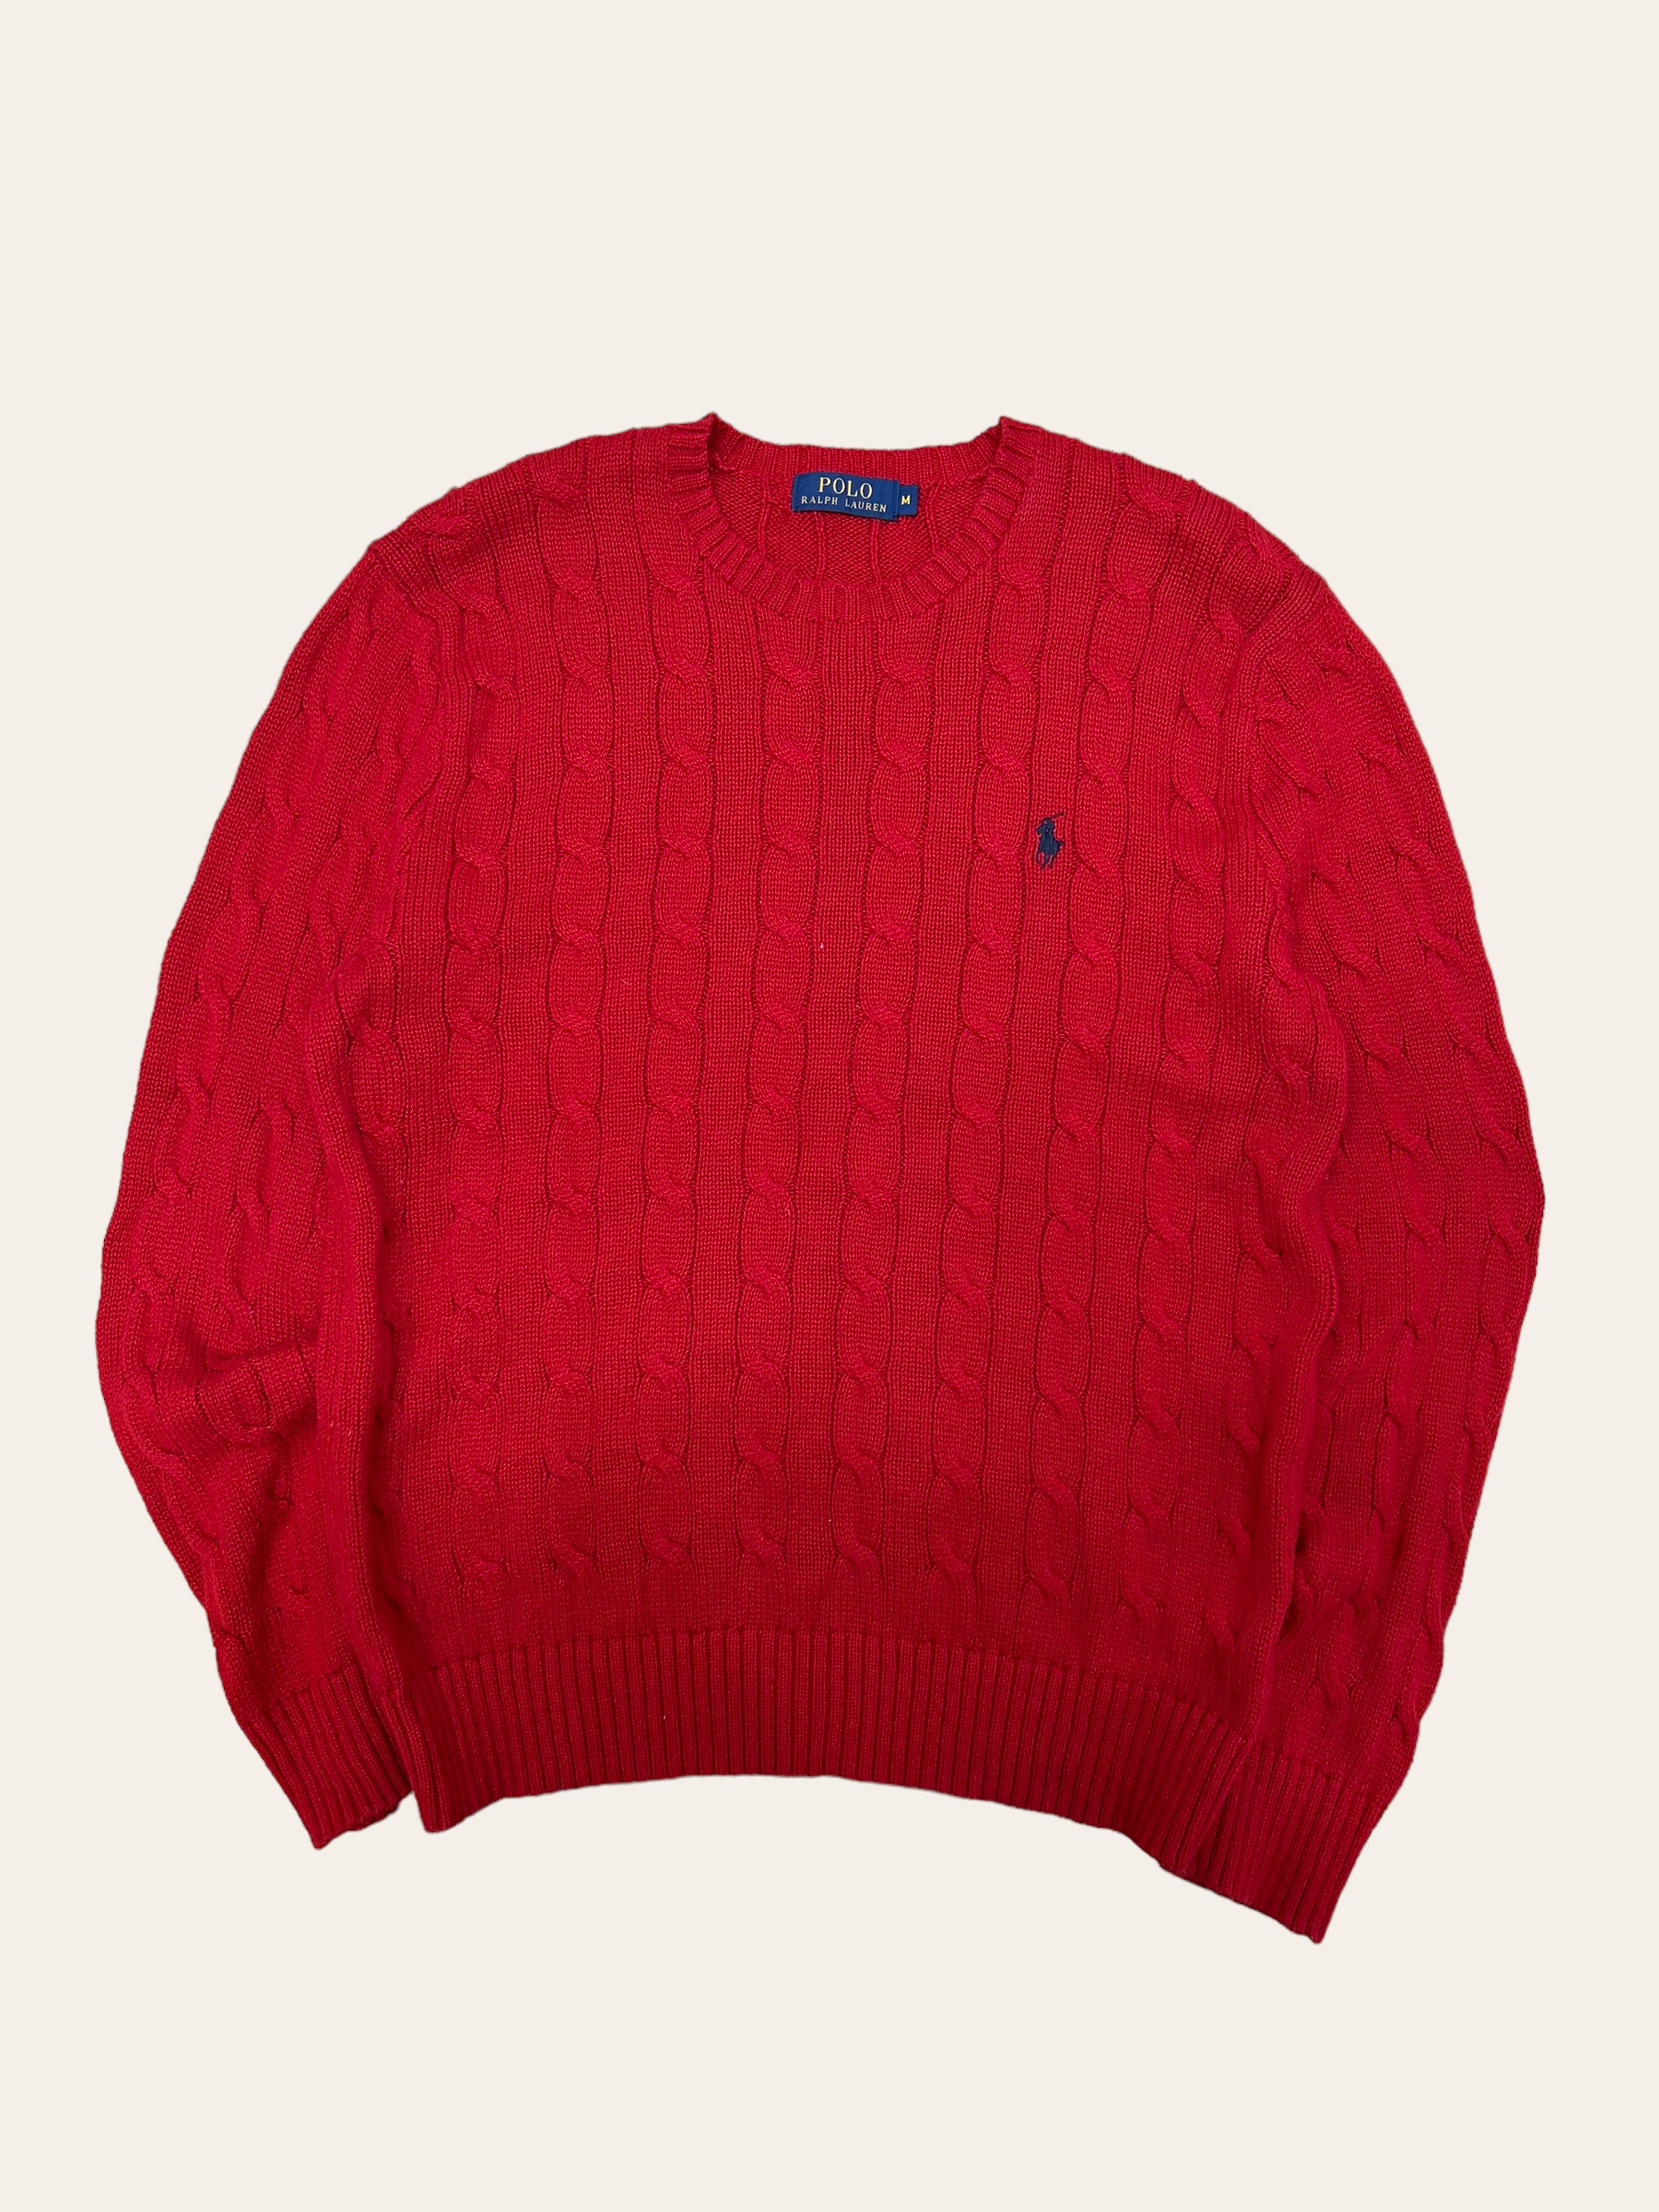 Polo ralph lauren red cable cotton sweater M